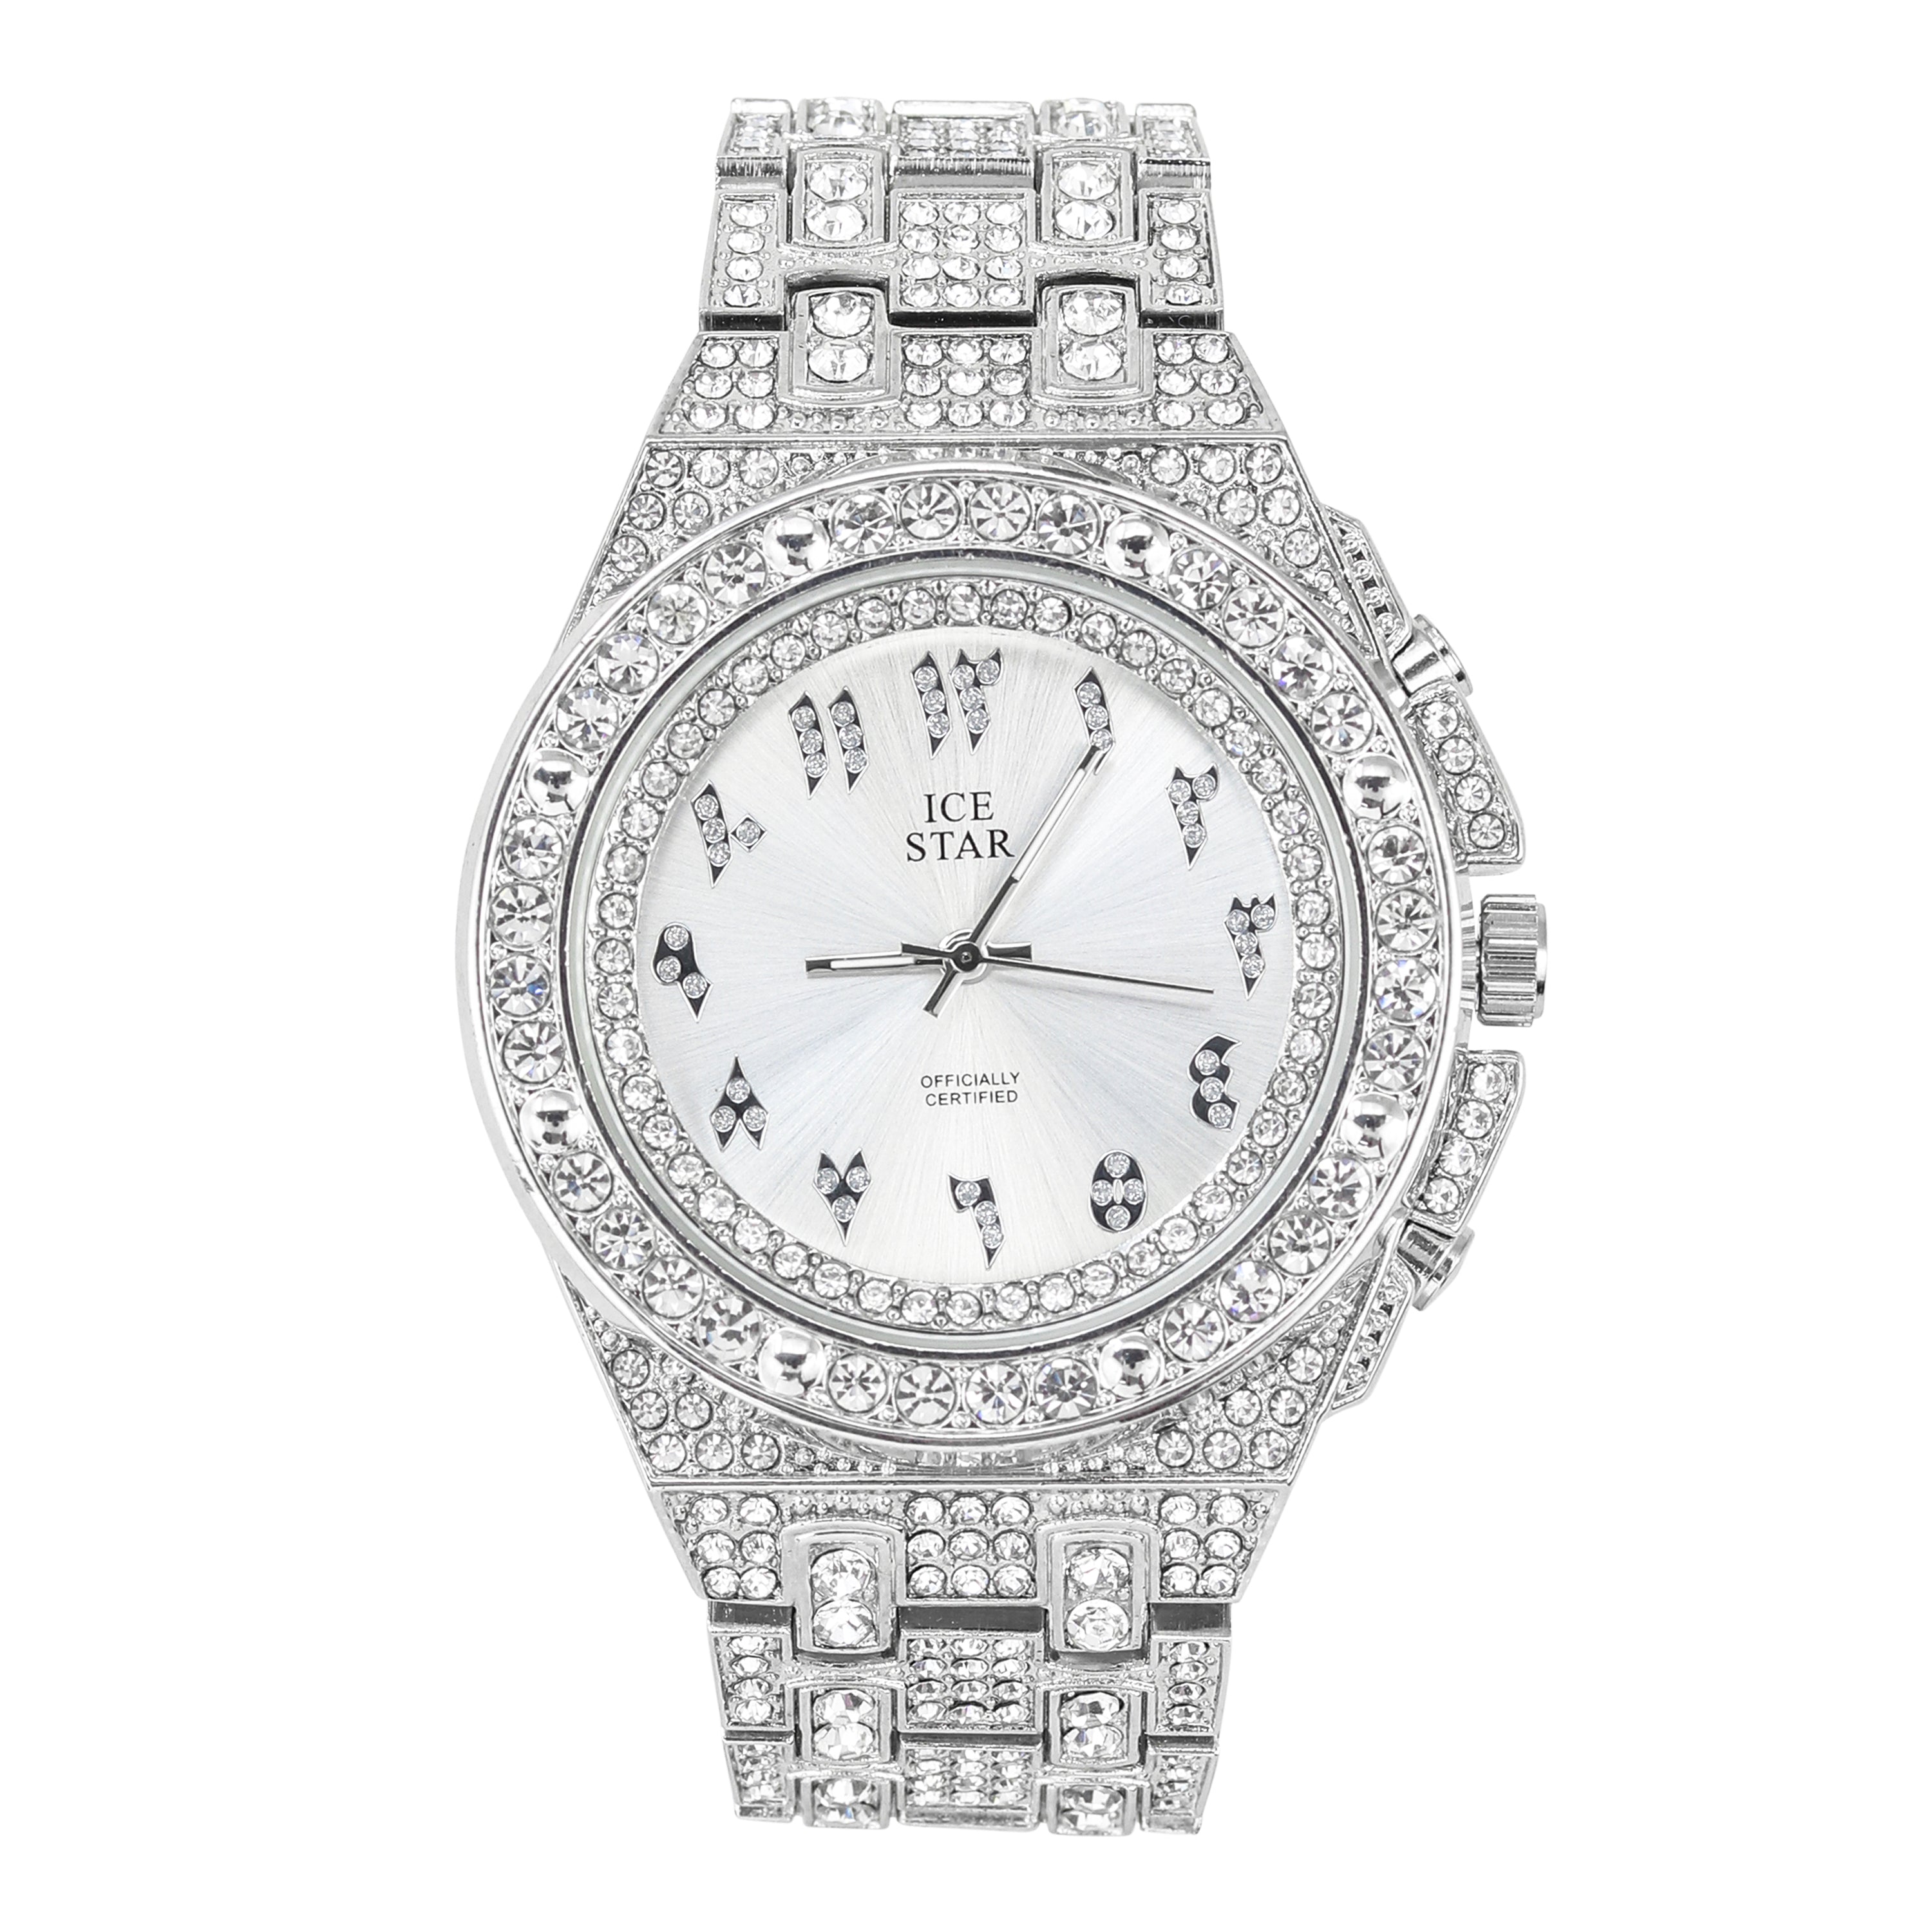 Men's Round Iced Out Watch 45mm Silver - Arabic Dial